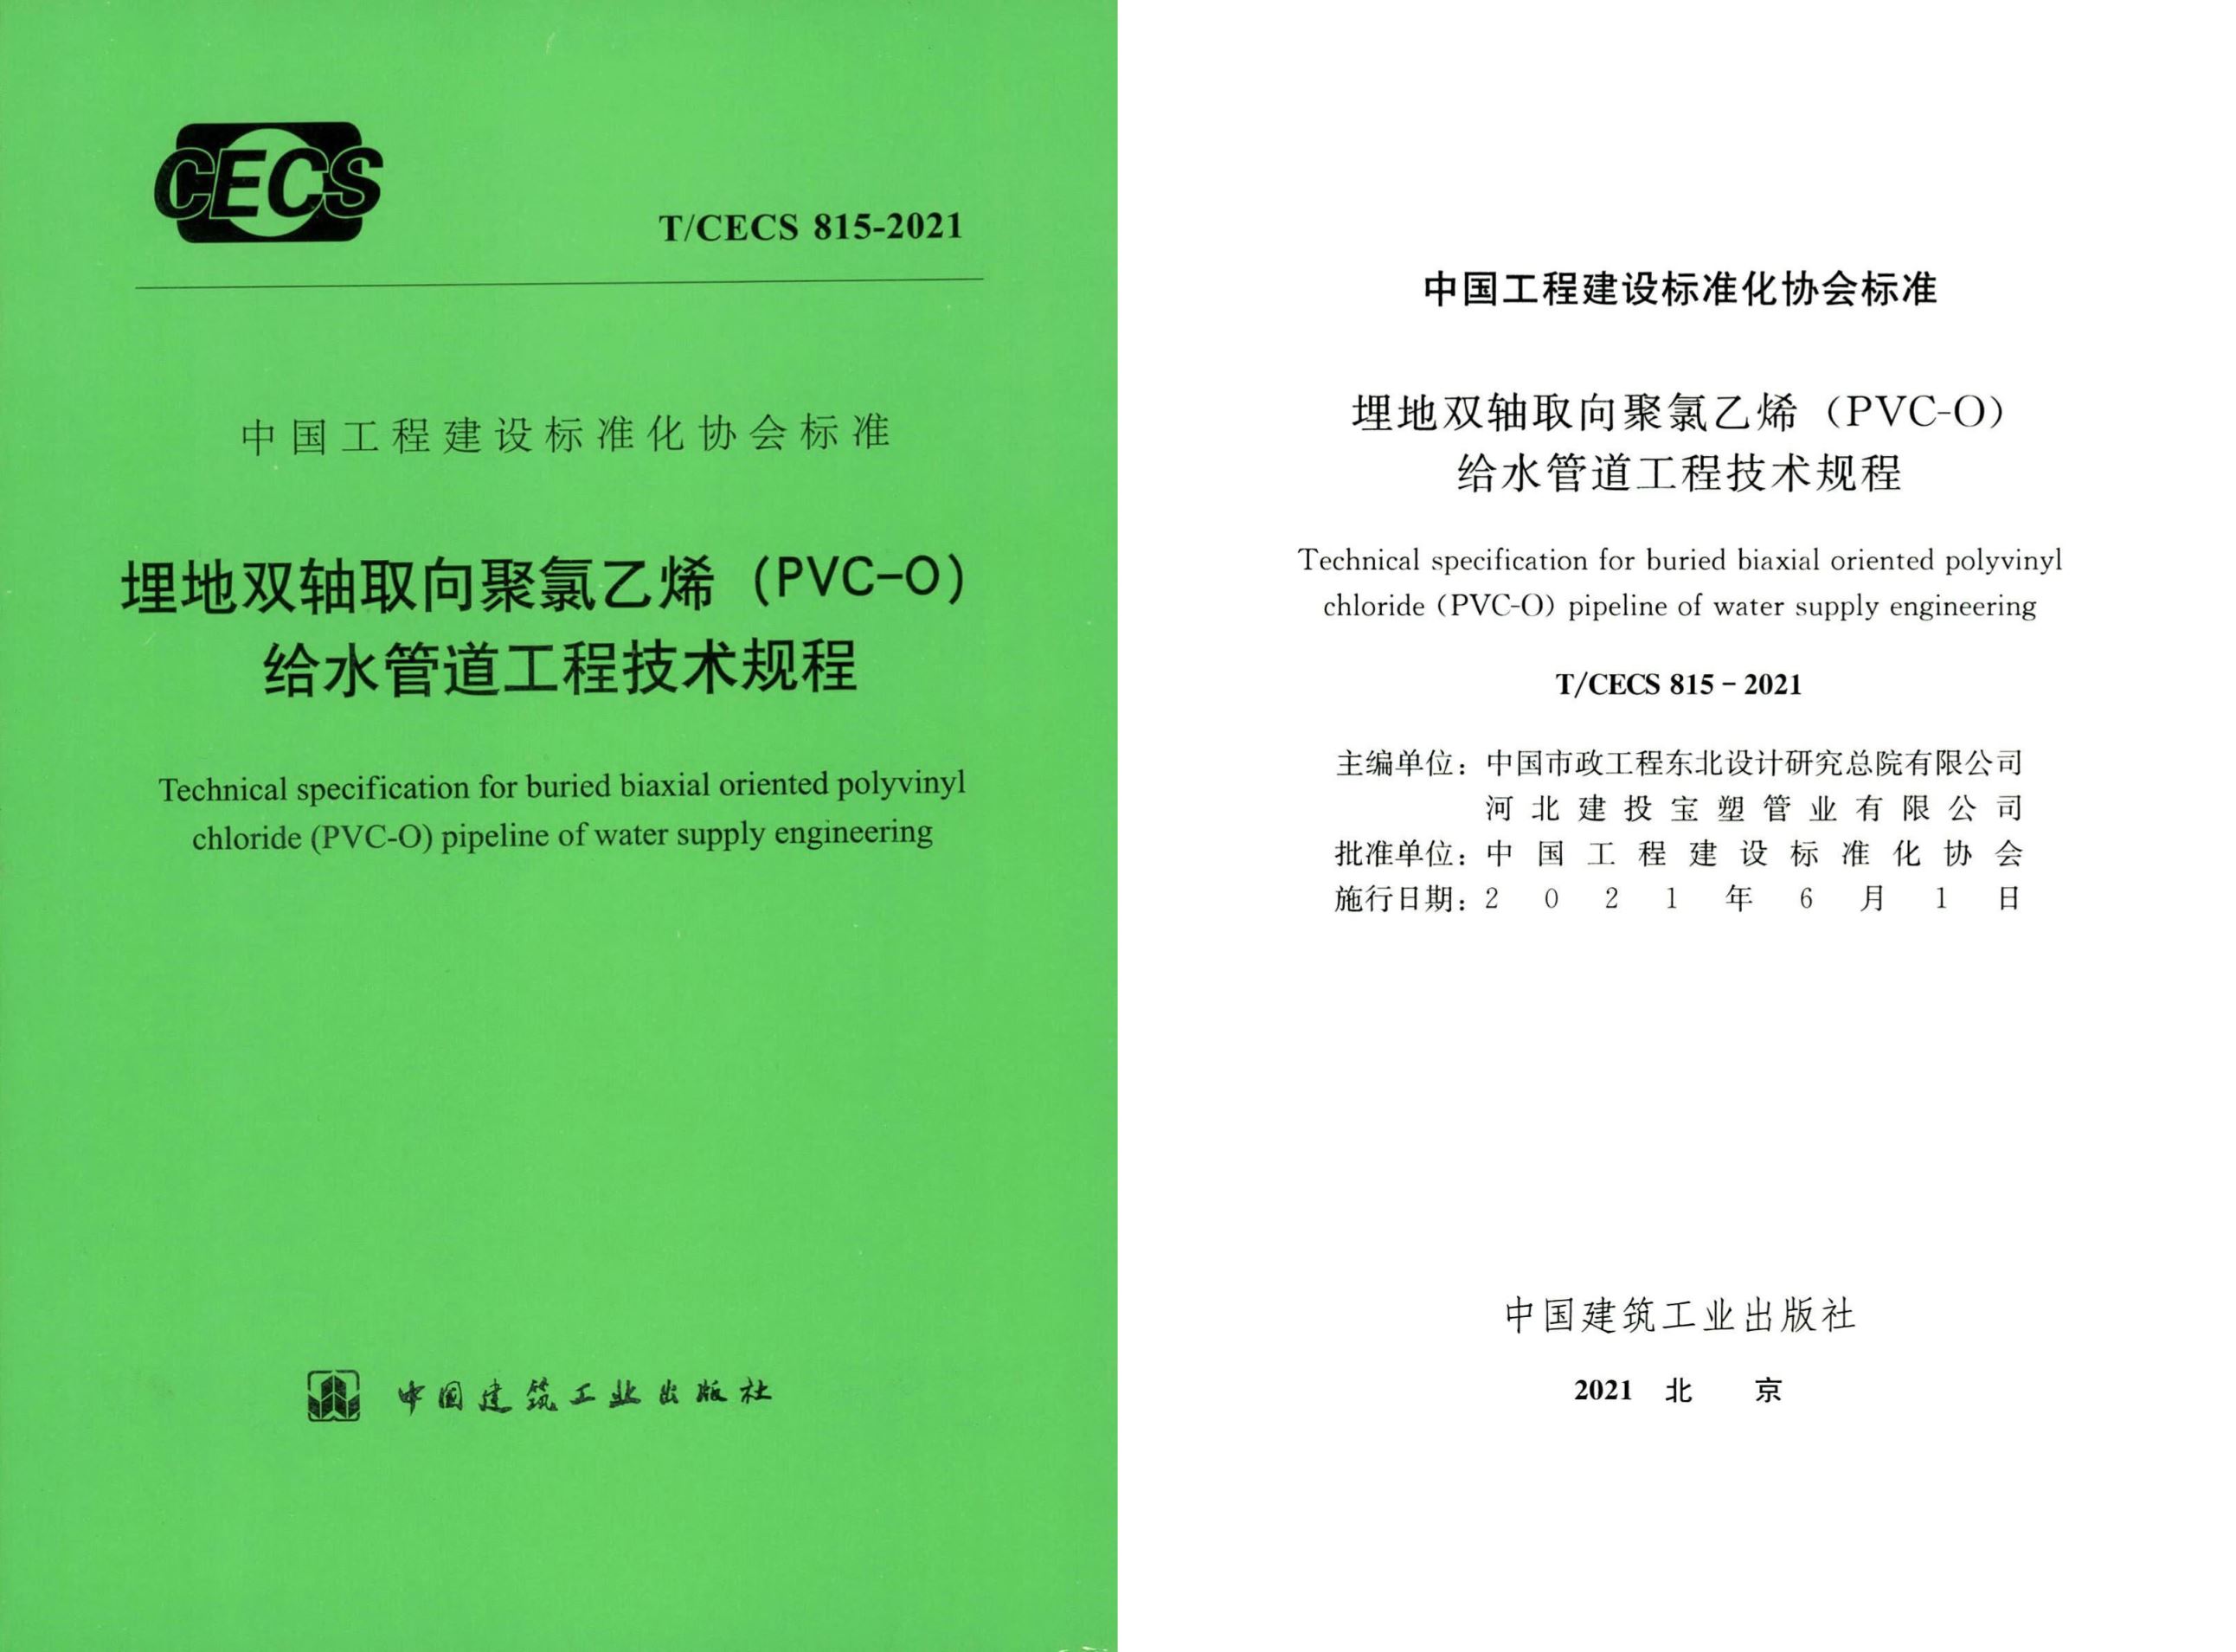 PVC-O Technology Specification of China Come into Practice(图1)